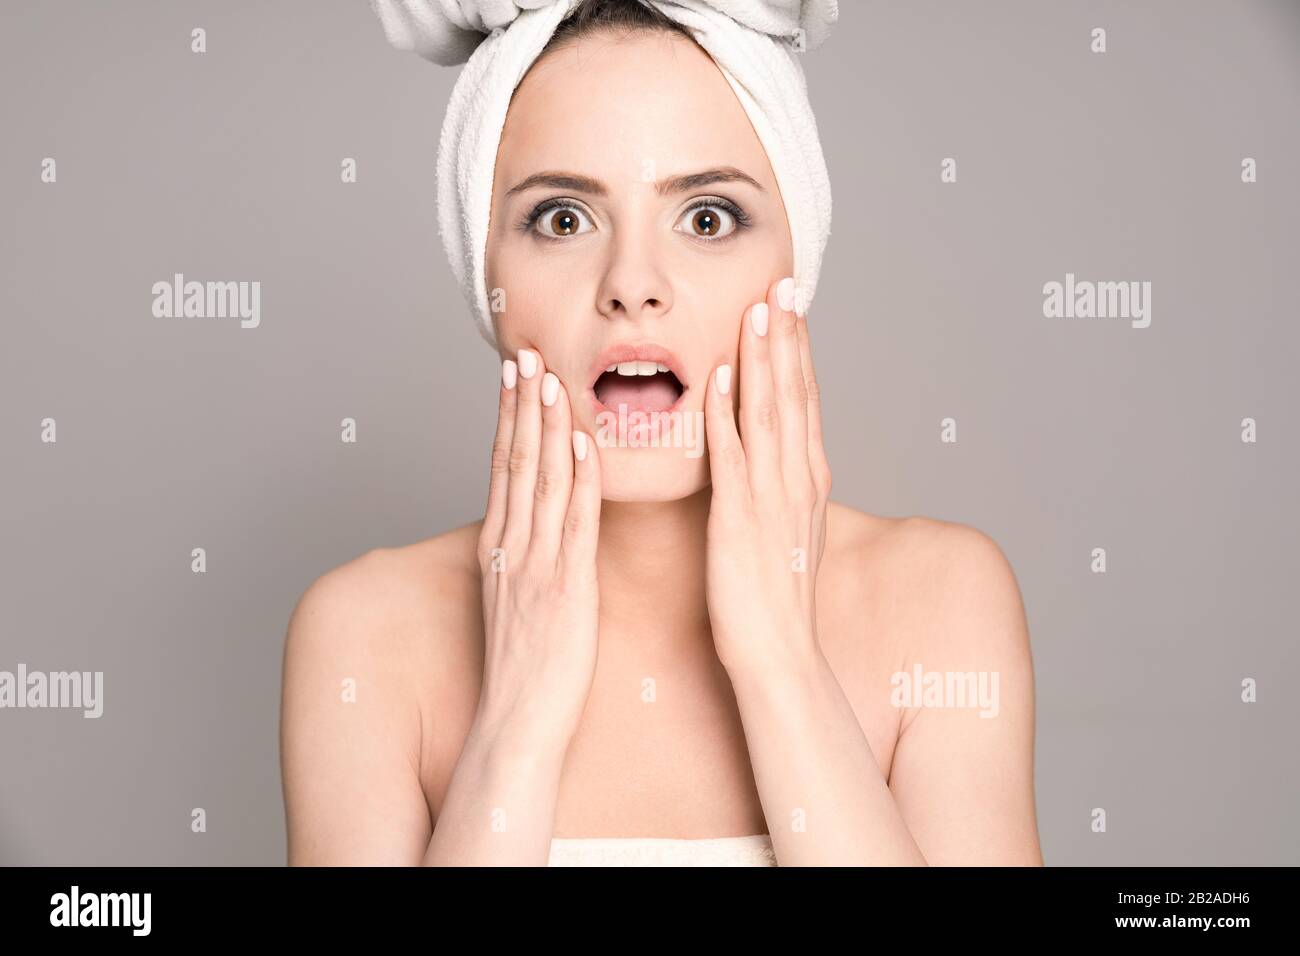 Shock and surprised - portrait of a beautiful young woman. Open mouth with surprise. Copy space on a gray background. Topics of beauty and spa. Stock Photo